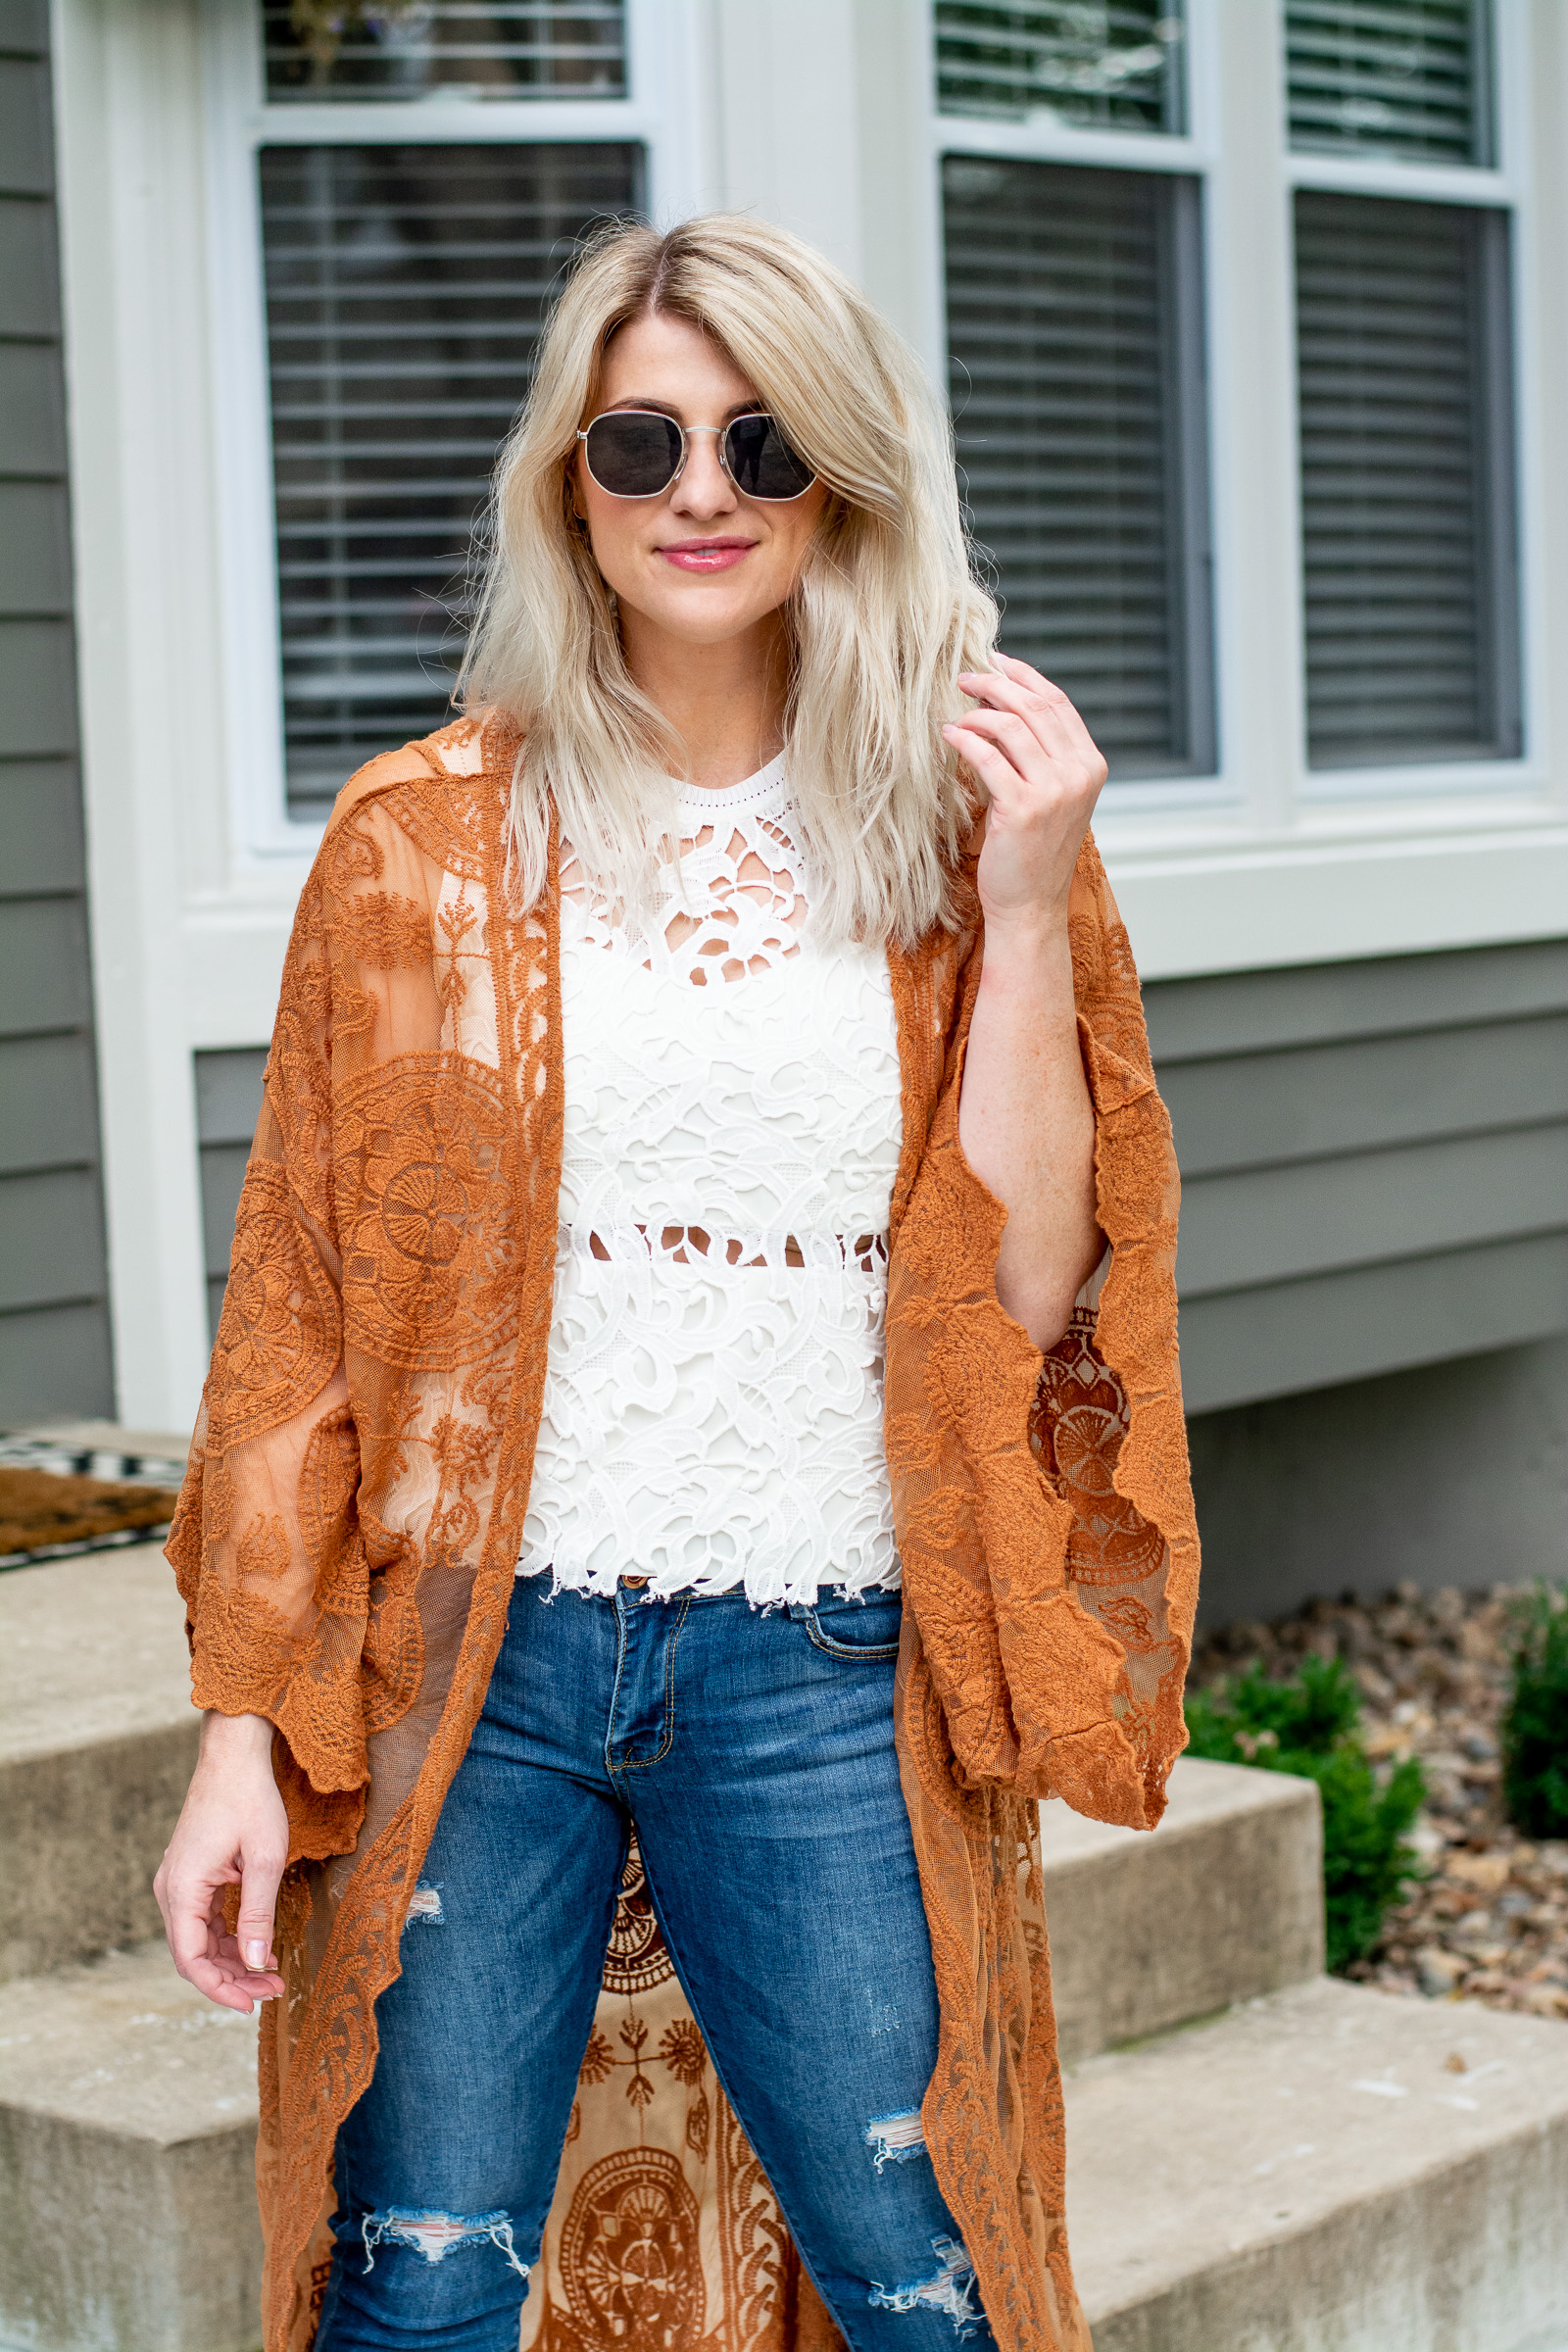 Pumpkin-colored Duster + White Booties. | Le Stylo Rouge